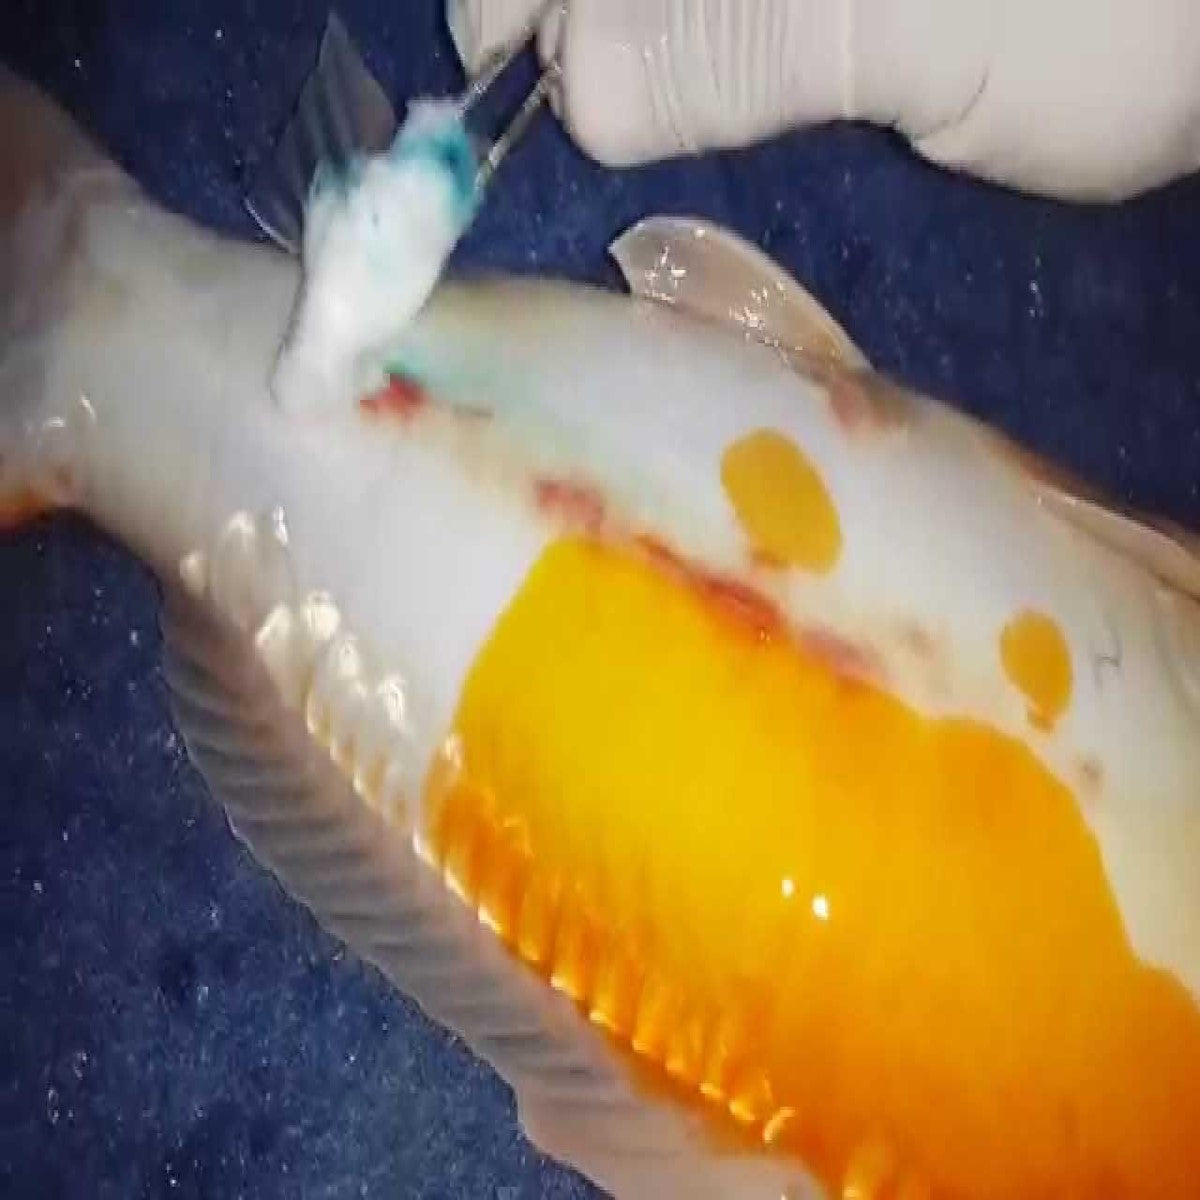 Koi fish with ulcer